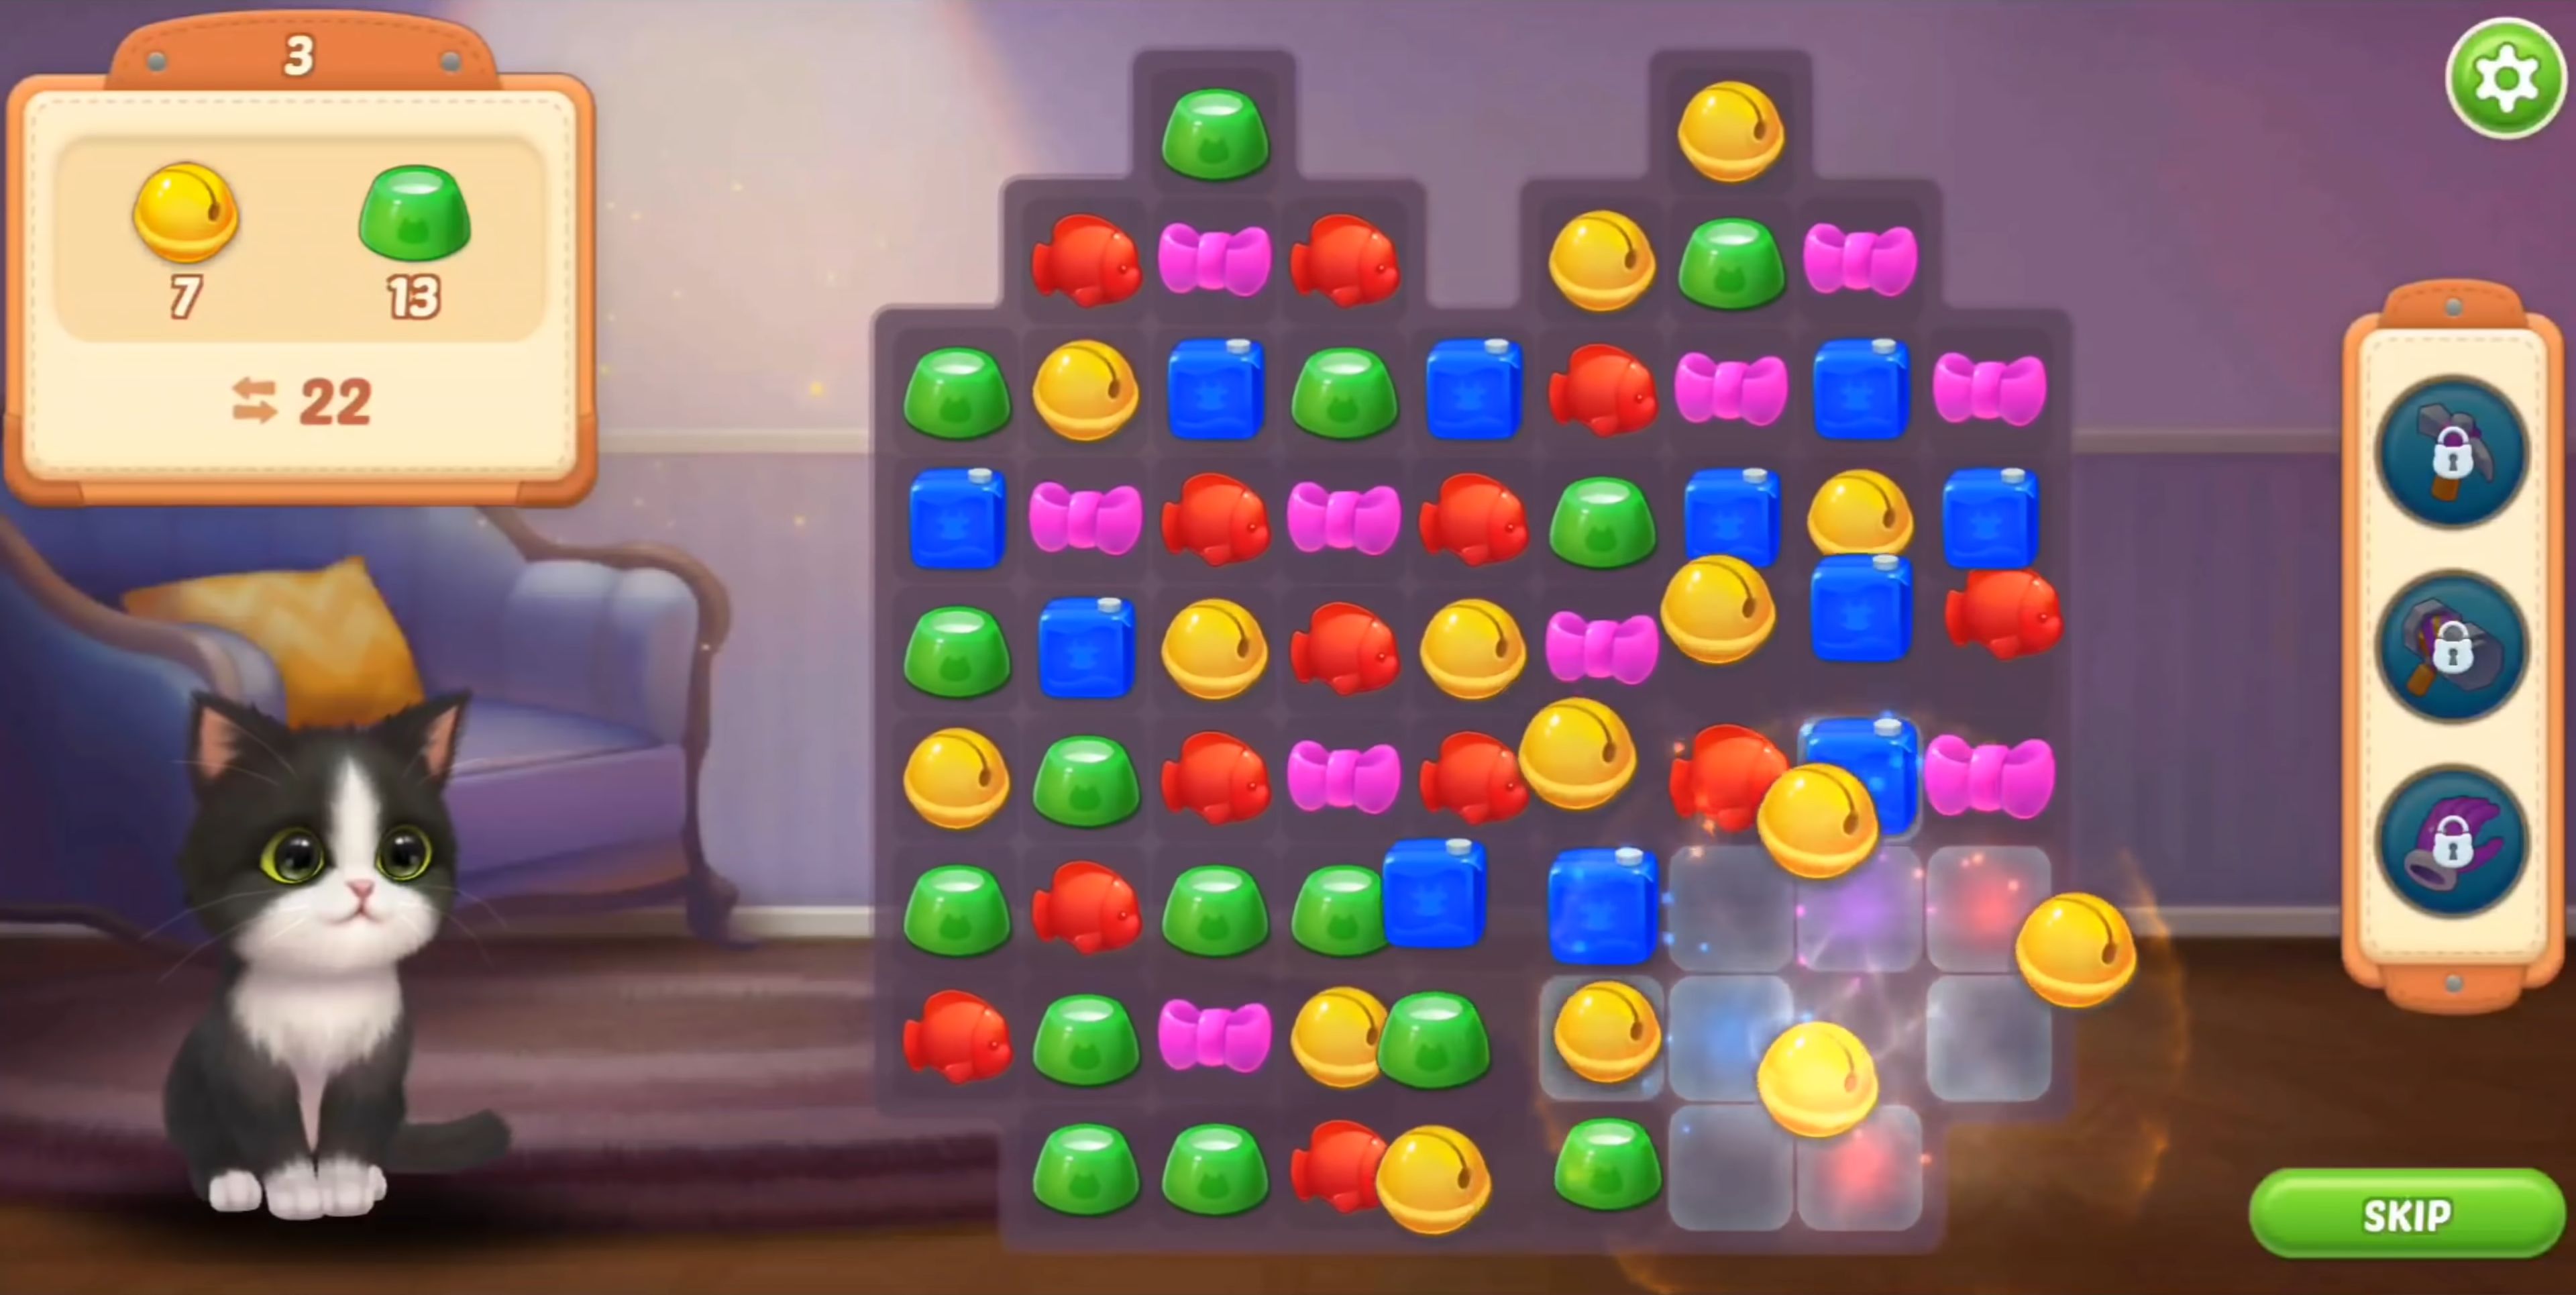 Gameplay of the Kitten Match for Android phone or tablet.